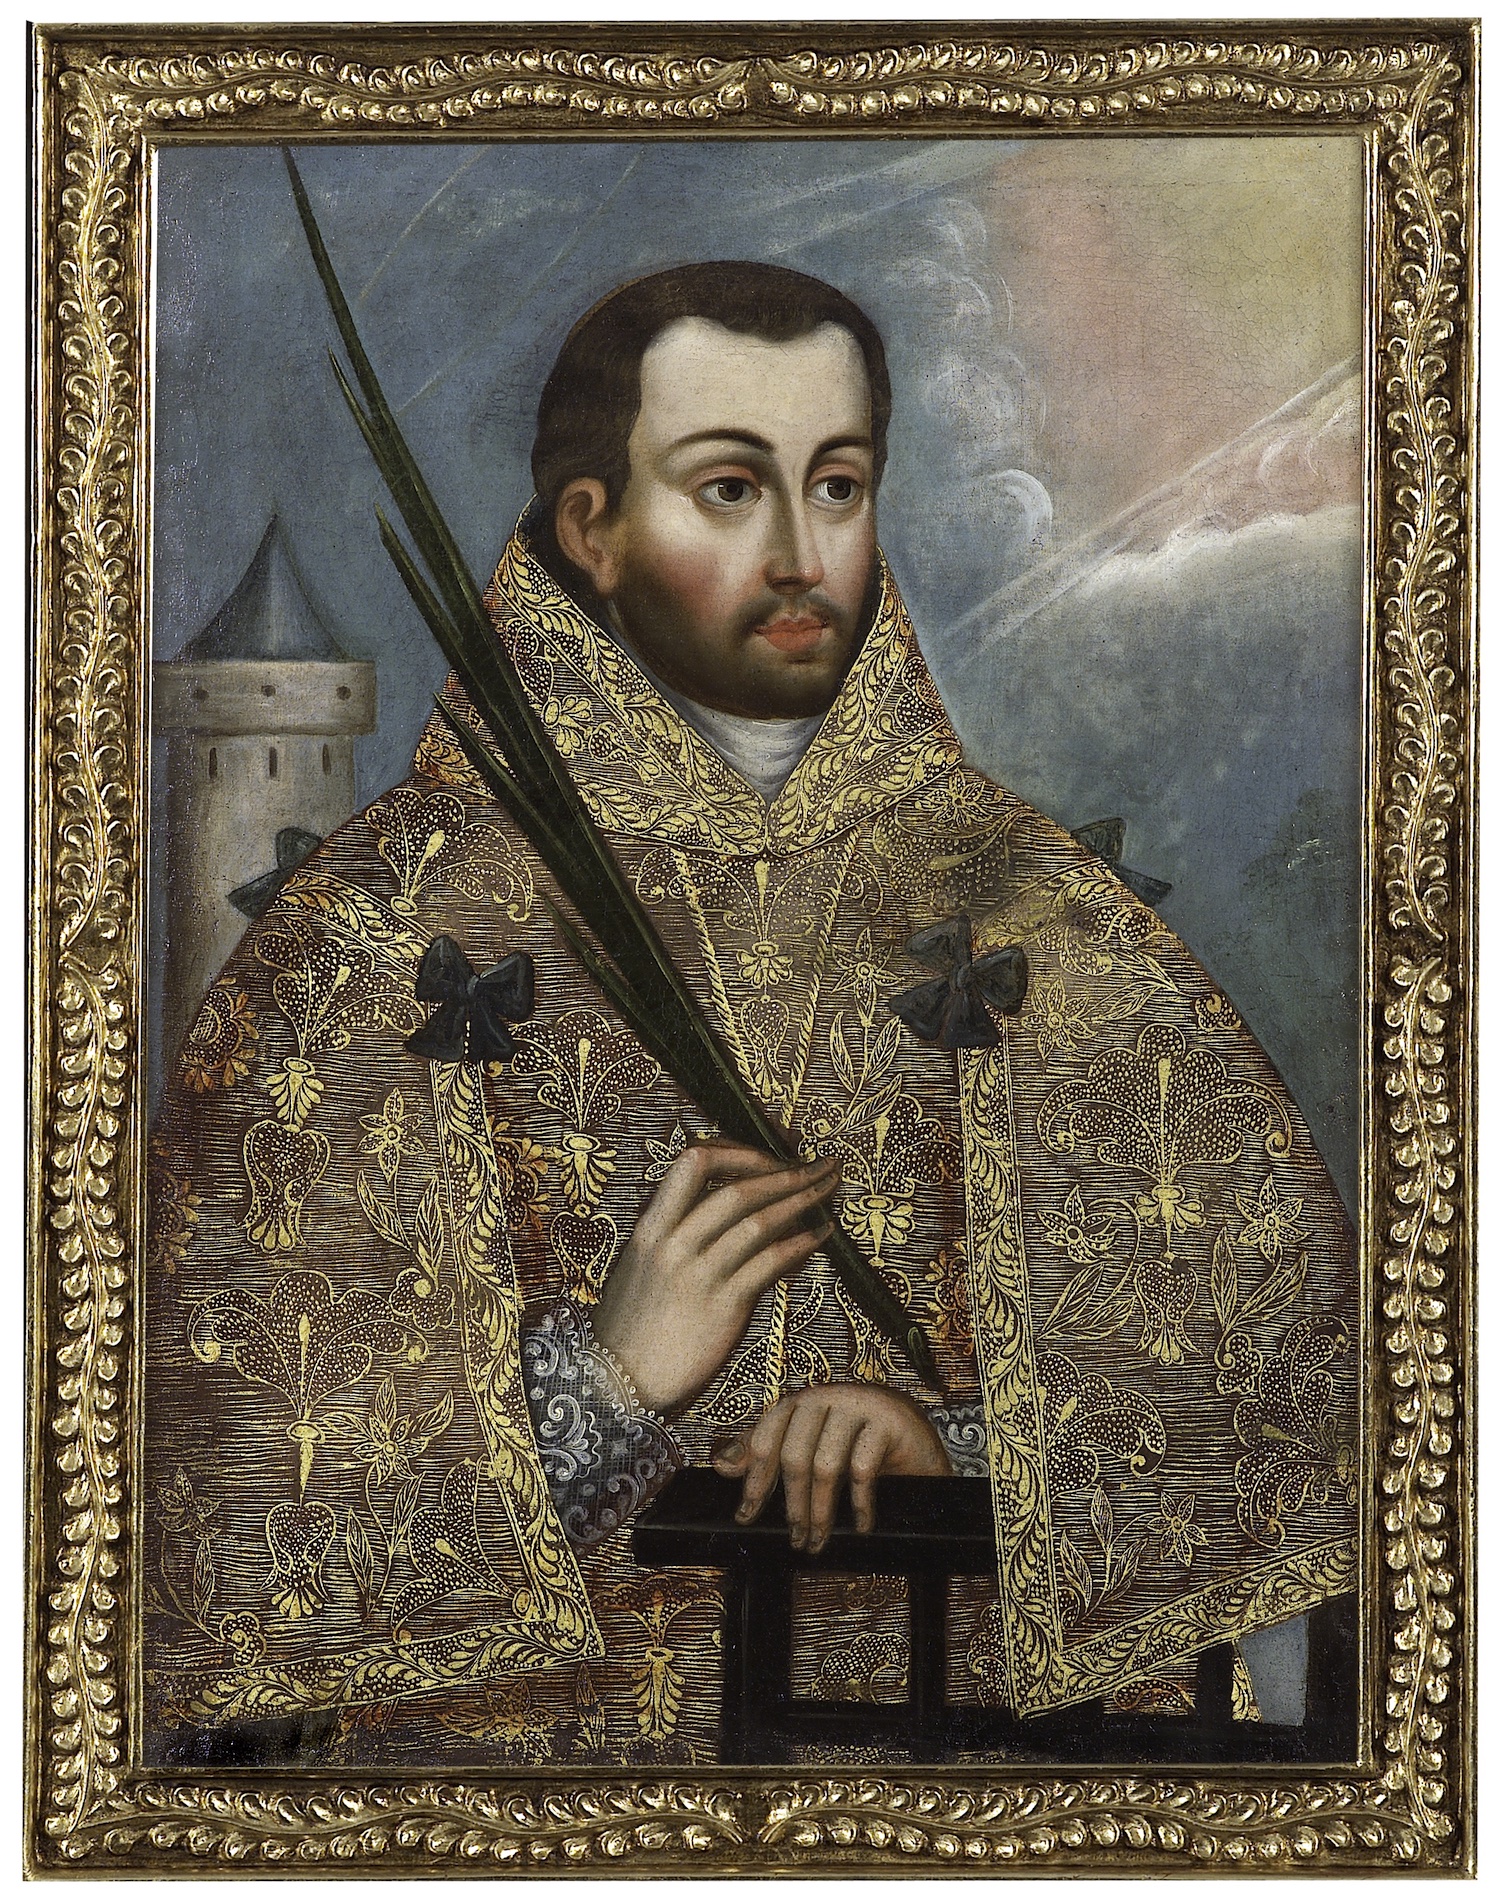 A painting of a man wearing a liturgical vestment, with extensive patterns in gold leaf